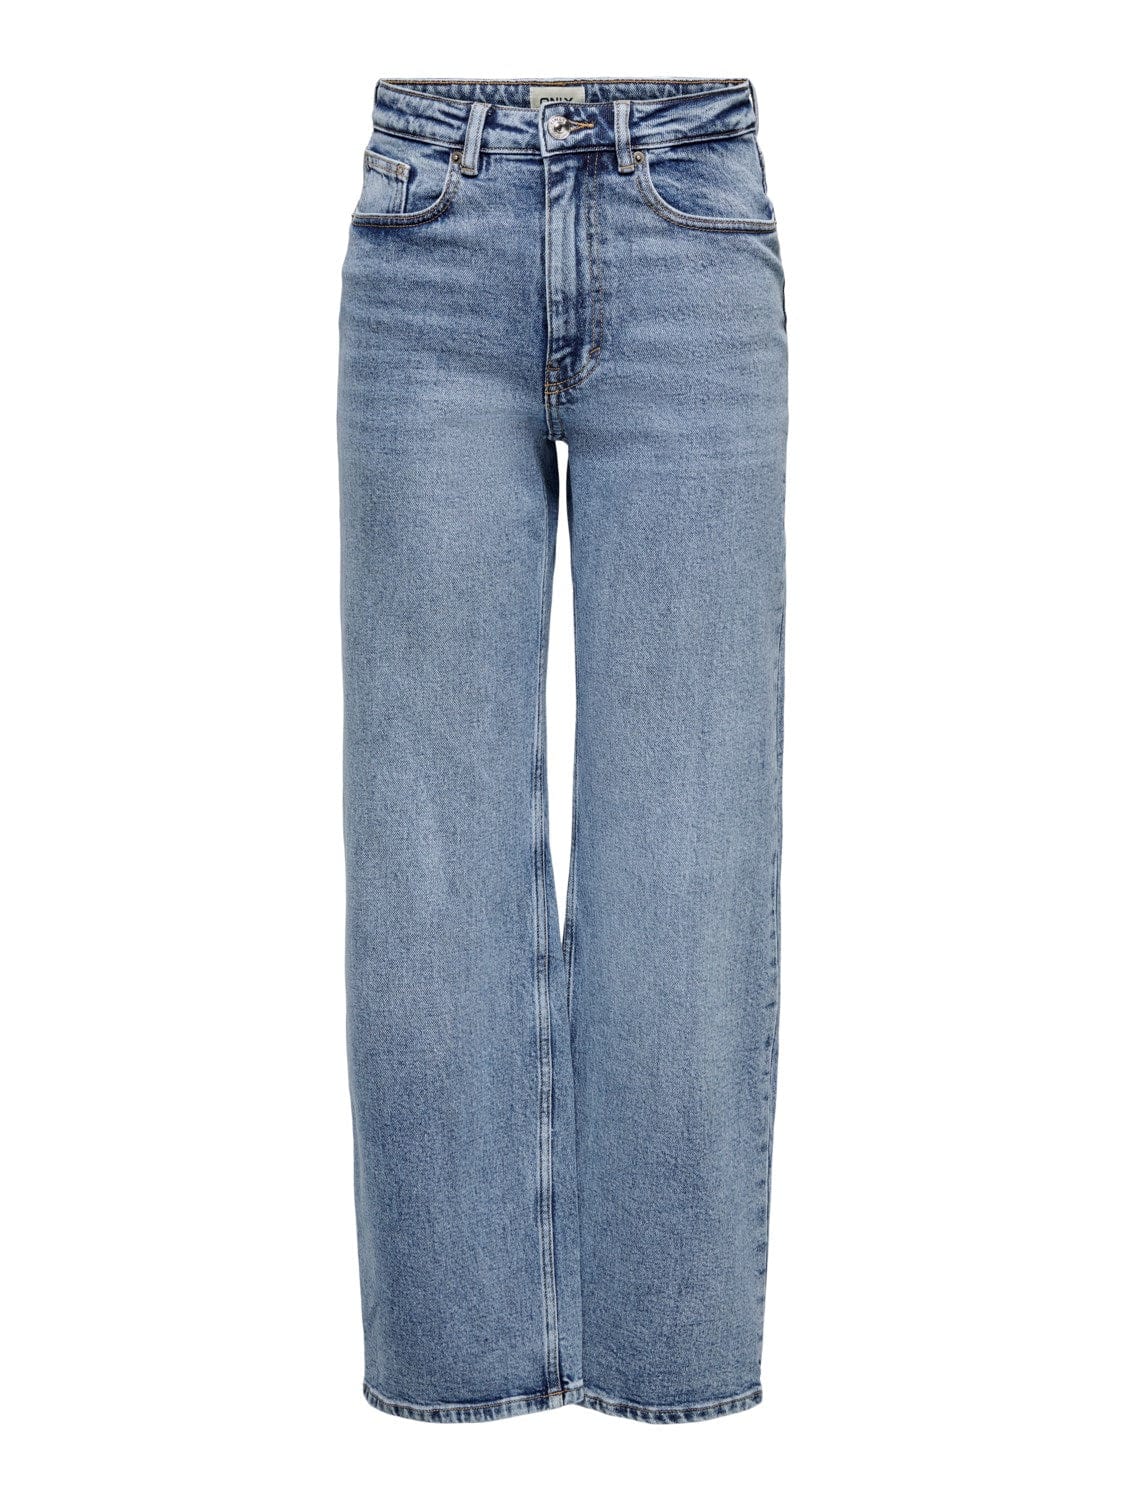 Only Underdele Denim Blue Wide Jeans - Juicy Only